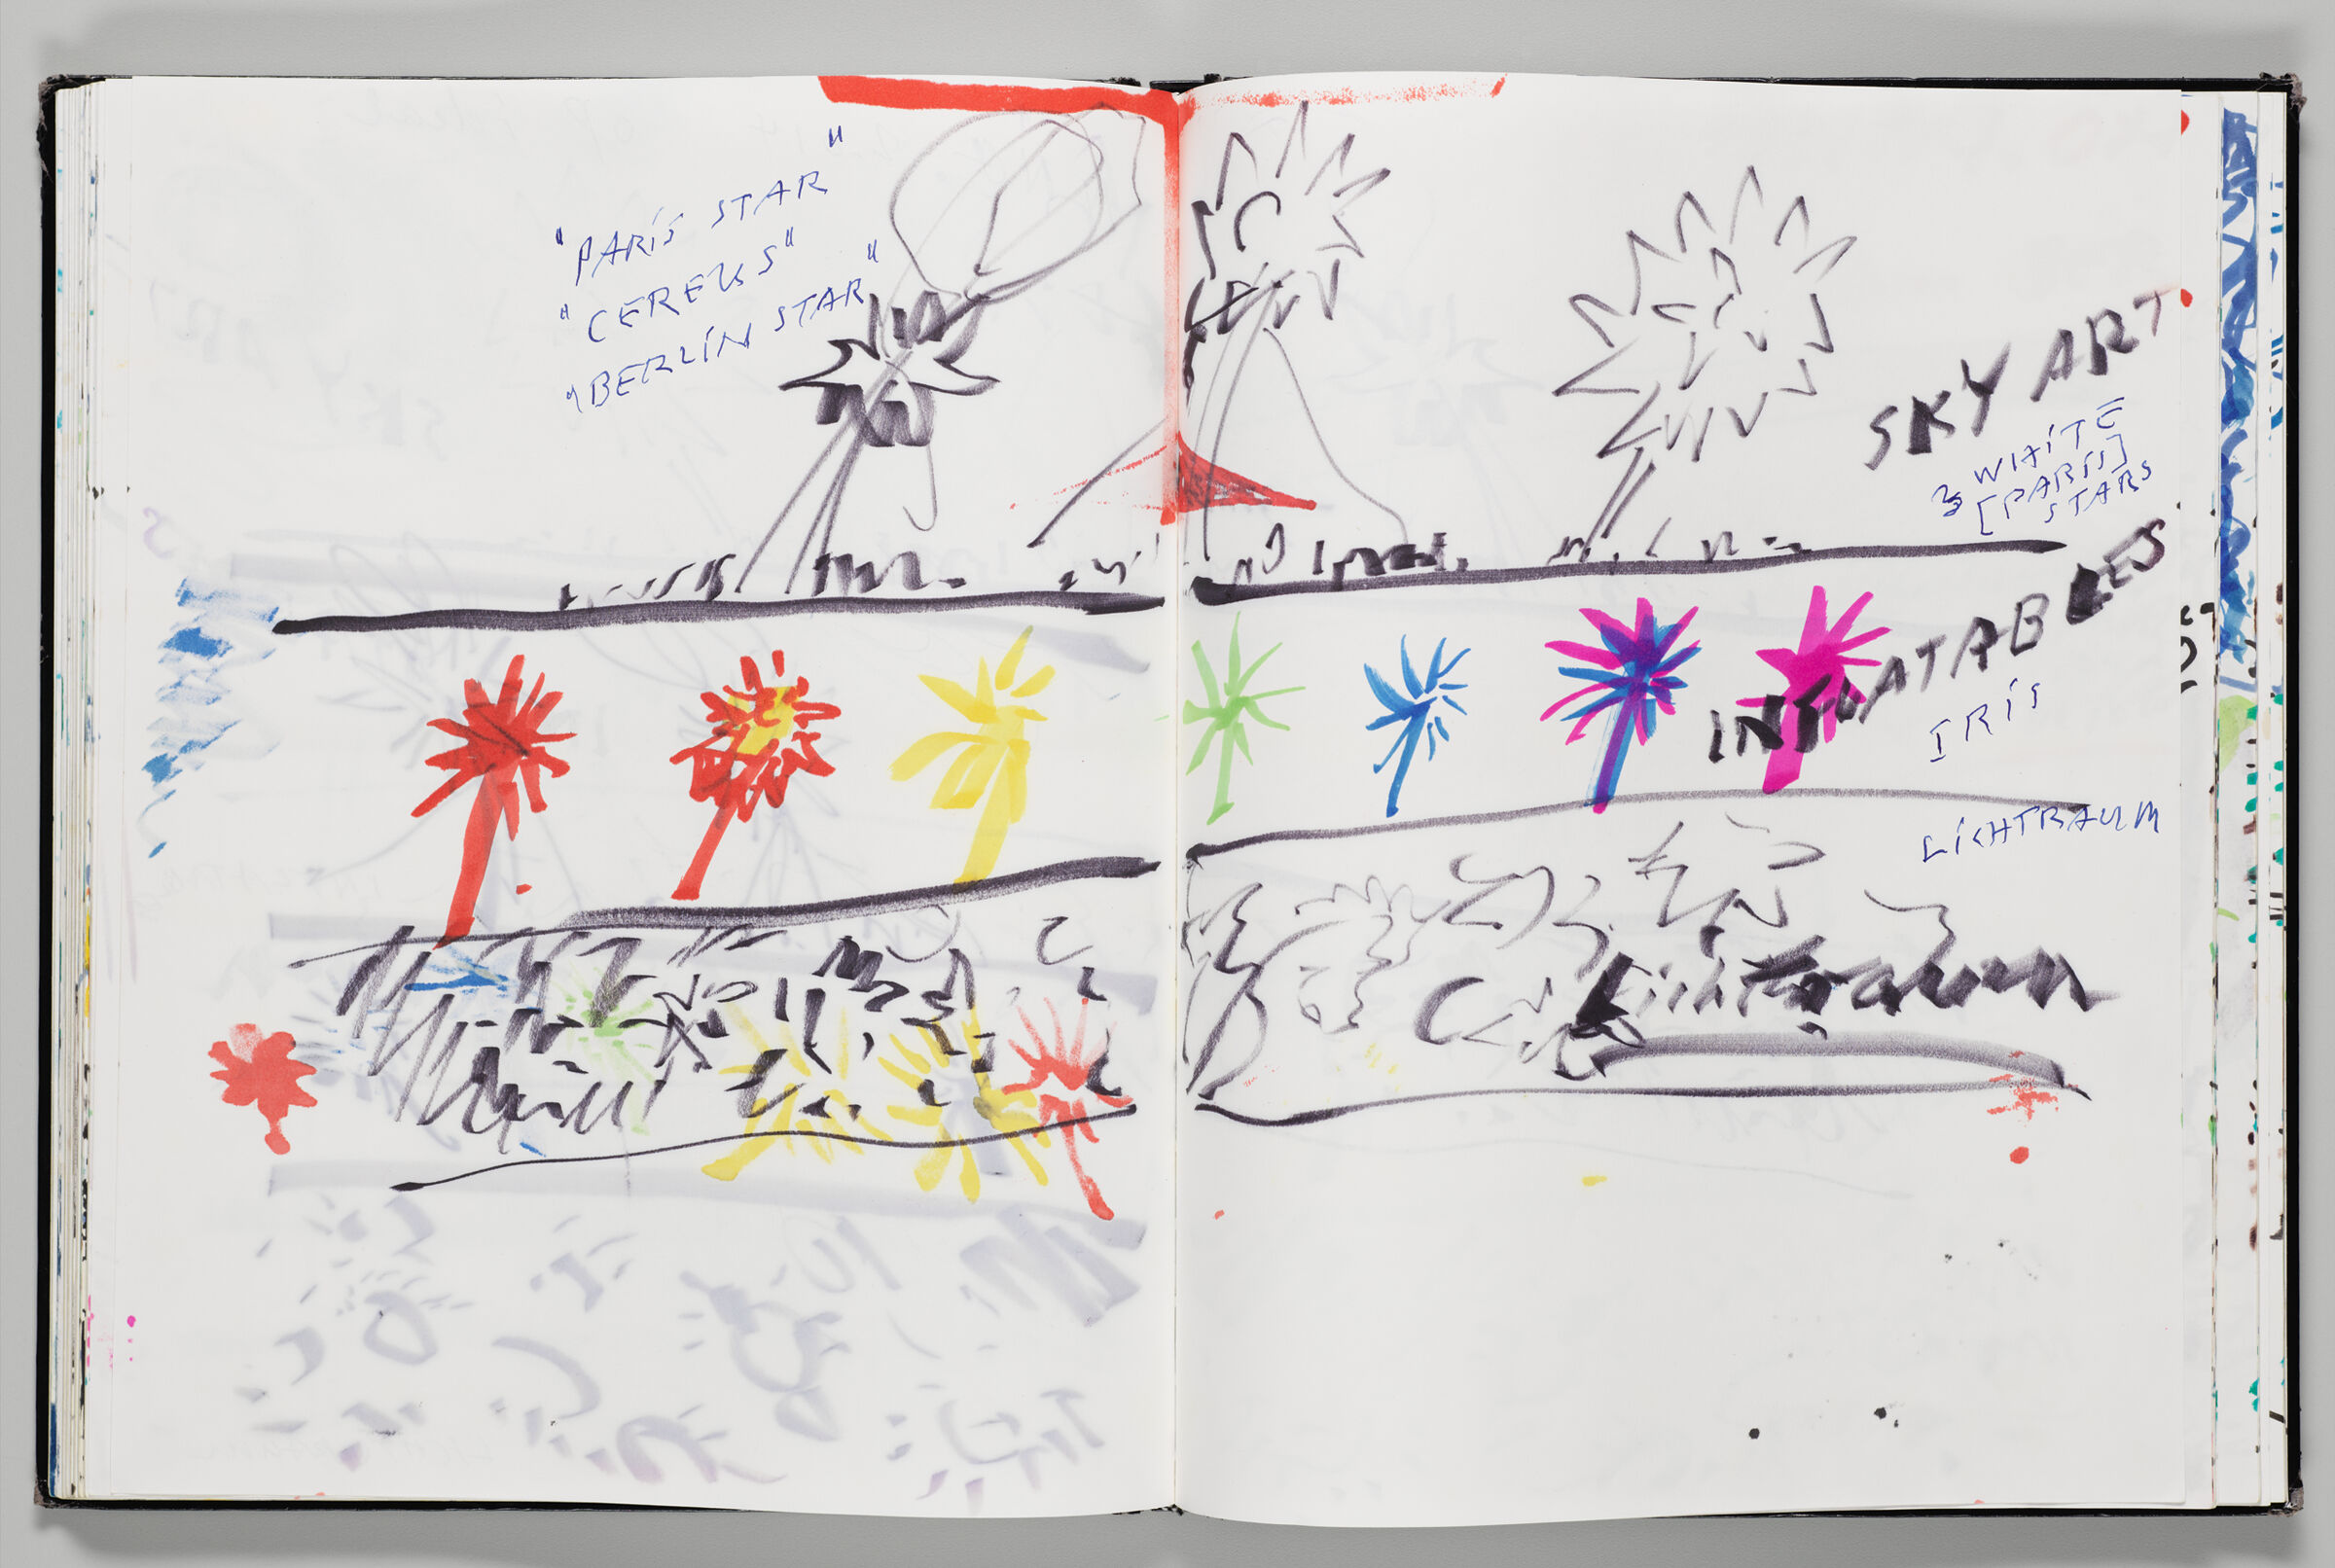 Untitled (Design For Neue Nationalgalerie Inflatables Over Bleed-Through, Two-Page Spread)